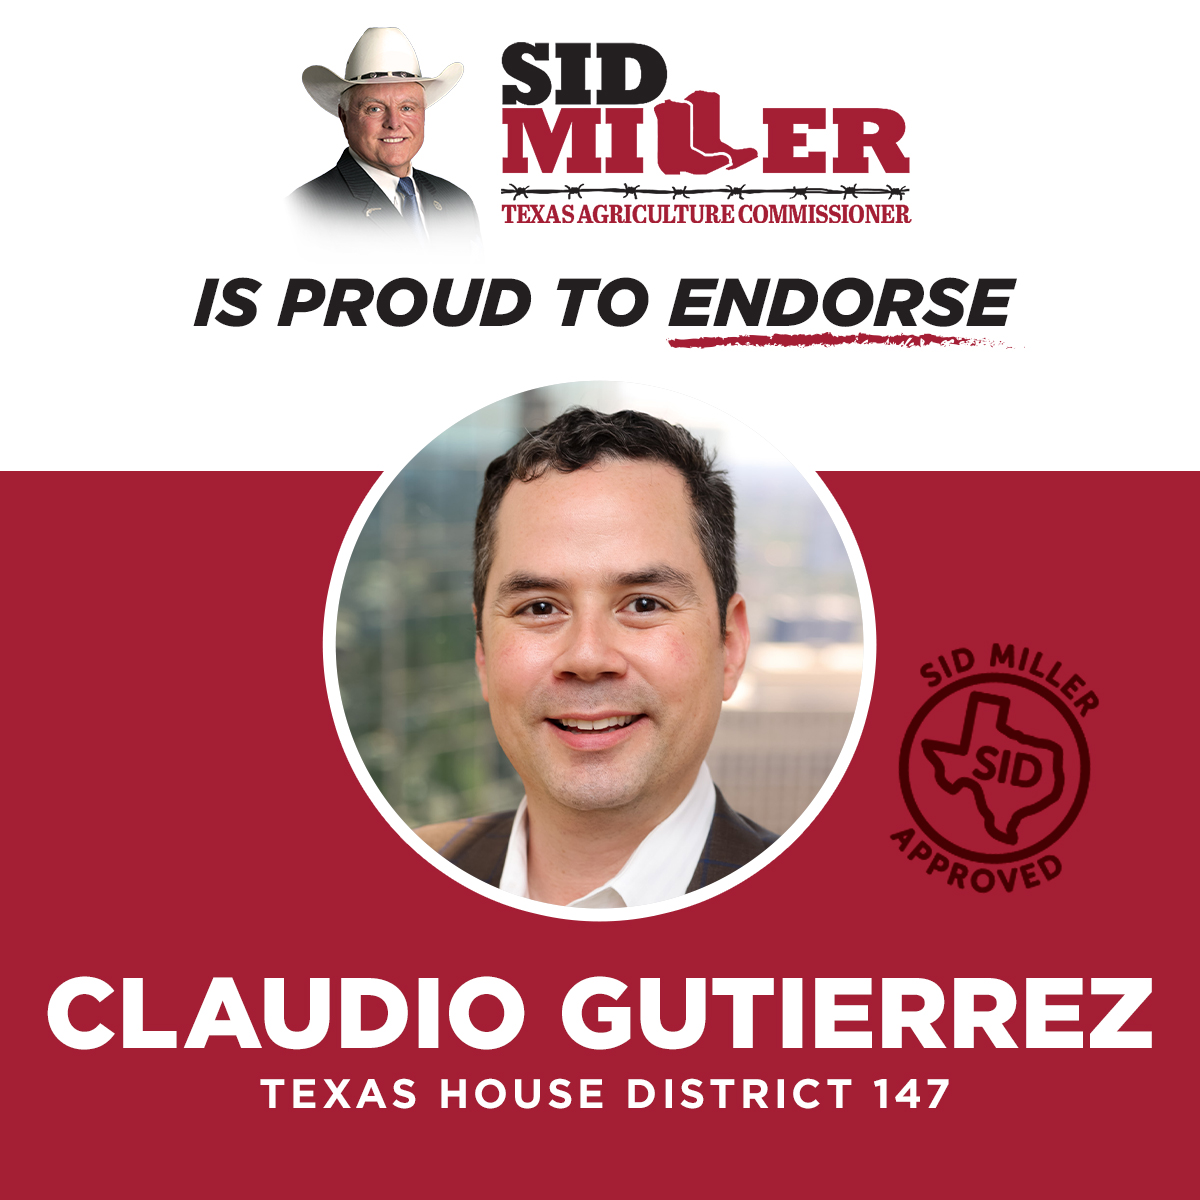 Born in Nicaragua and forced to flee the communists, @Claudio4TX is living his American dream. An engineer and a business owner, he understands Houston's role in our economy. Deeply patriotic, Claudio will defend our border and cut taxes. #txlege #GOP #runoff